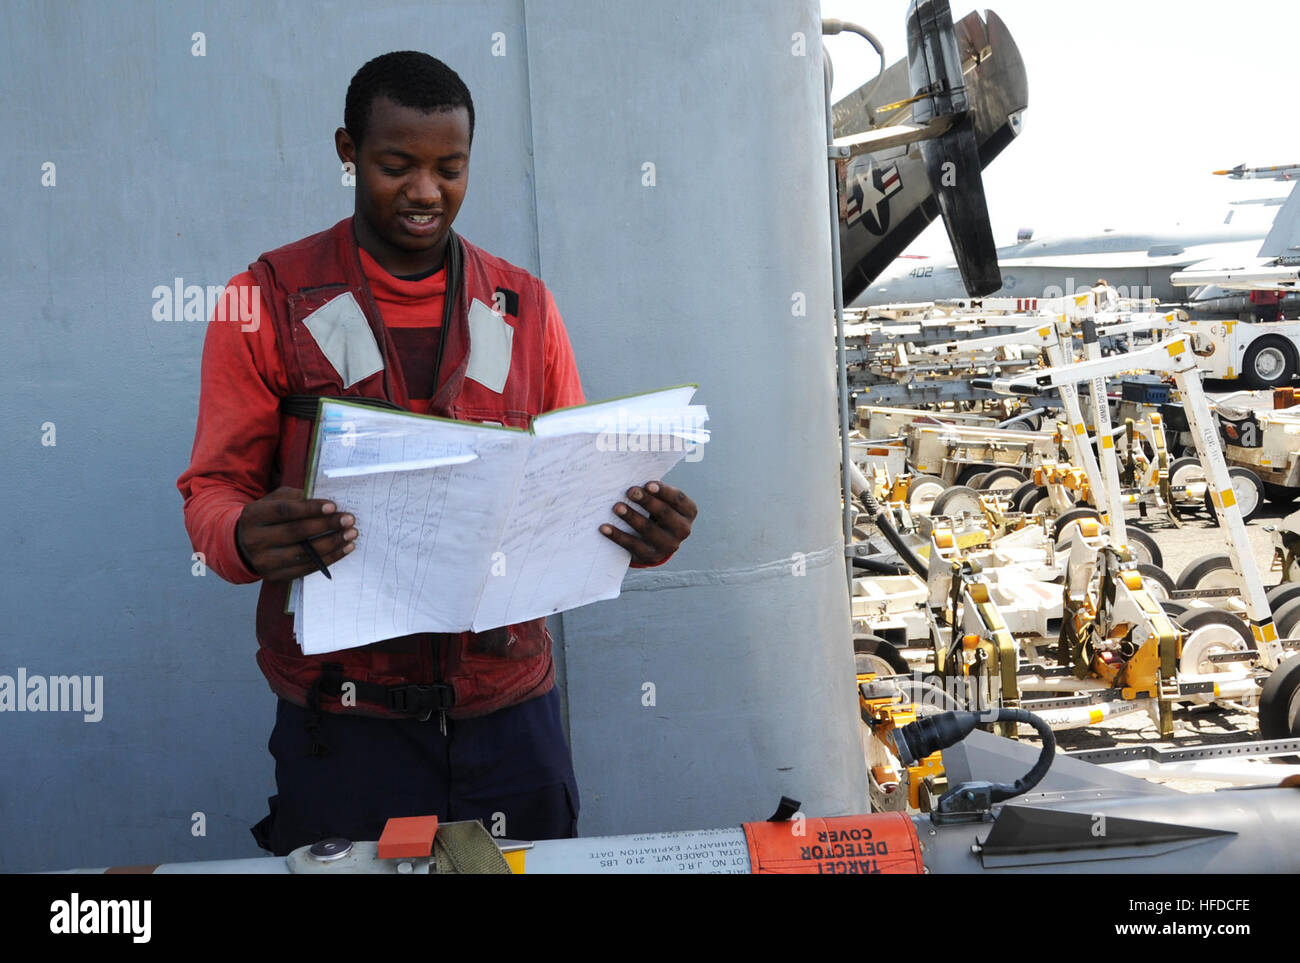 U.S. Navy Aviation Ordnanceman Airman Jeremy Brown checks an ordnance log aboard the aircraft carrier USS George H.W. Bush (CVN 77) in the Persian Gulf June 26, 2014. The George H.W. Bush supported maritime security operations and theater security cooperation efforts in the U.S. 5th Fleet area of responsibility. (U.S. Navy photo by Mass Communication Specialist 3rd Class Lorelei Vander Griend/Released) U.S. Navy Aviation Ordnanceman Airman Jeremy Brown checks an ordnance log aboard the aircraft carrier USS George H.W. Bush (CVN 77) in the Persian Gulf June 26, 2014 140626-N-MU440-024 Stock Photo